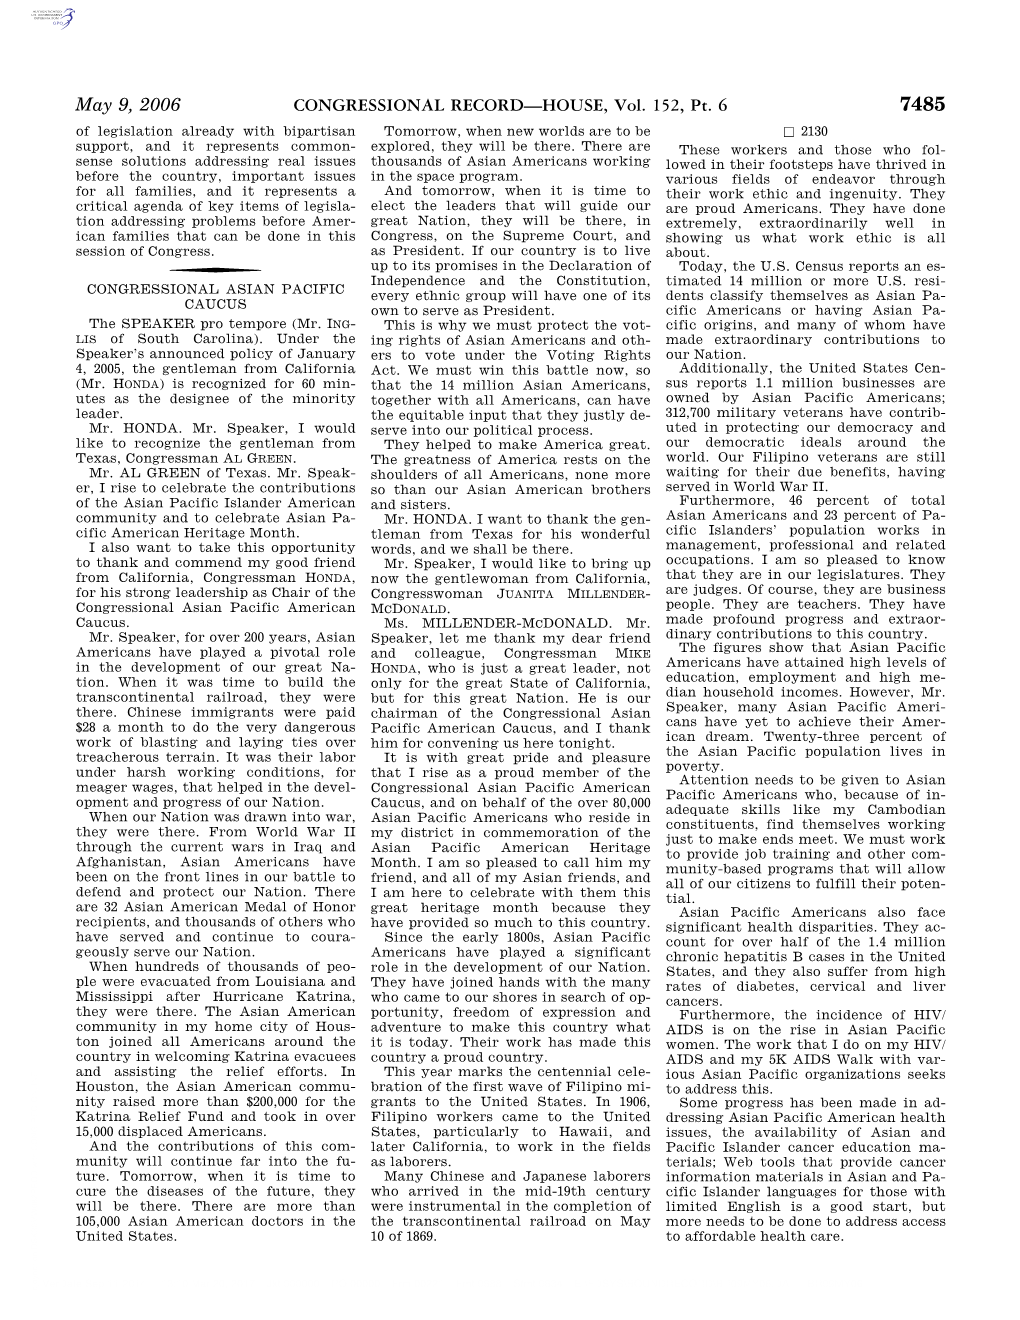 CONGRESSIONAL RECORD—HOUSE, Vol. 152, Pt. 6 May 9, 2006